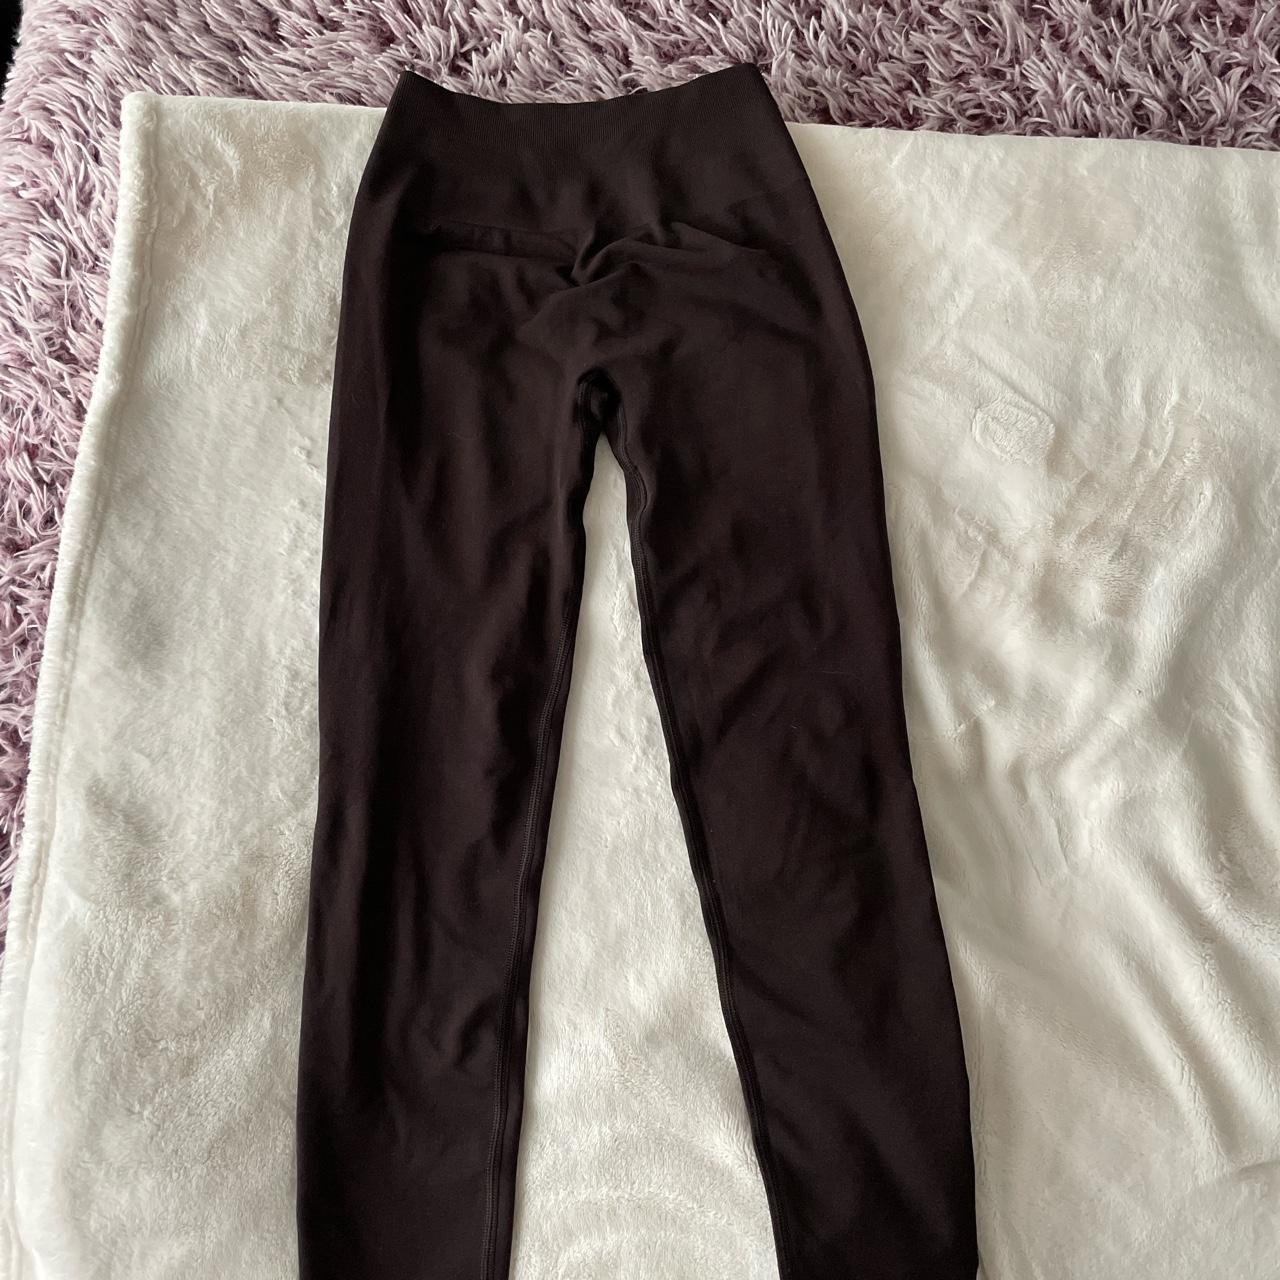 Alphalete Amplify Leggings In Chocolate Brown Size M - $75 - From Evelyn